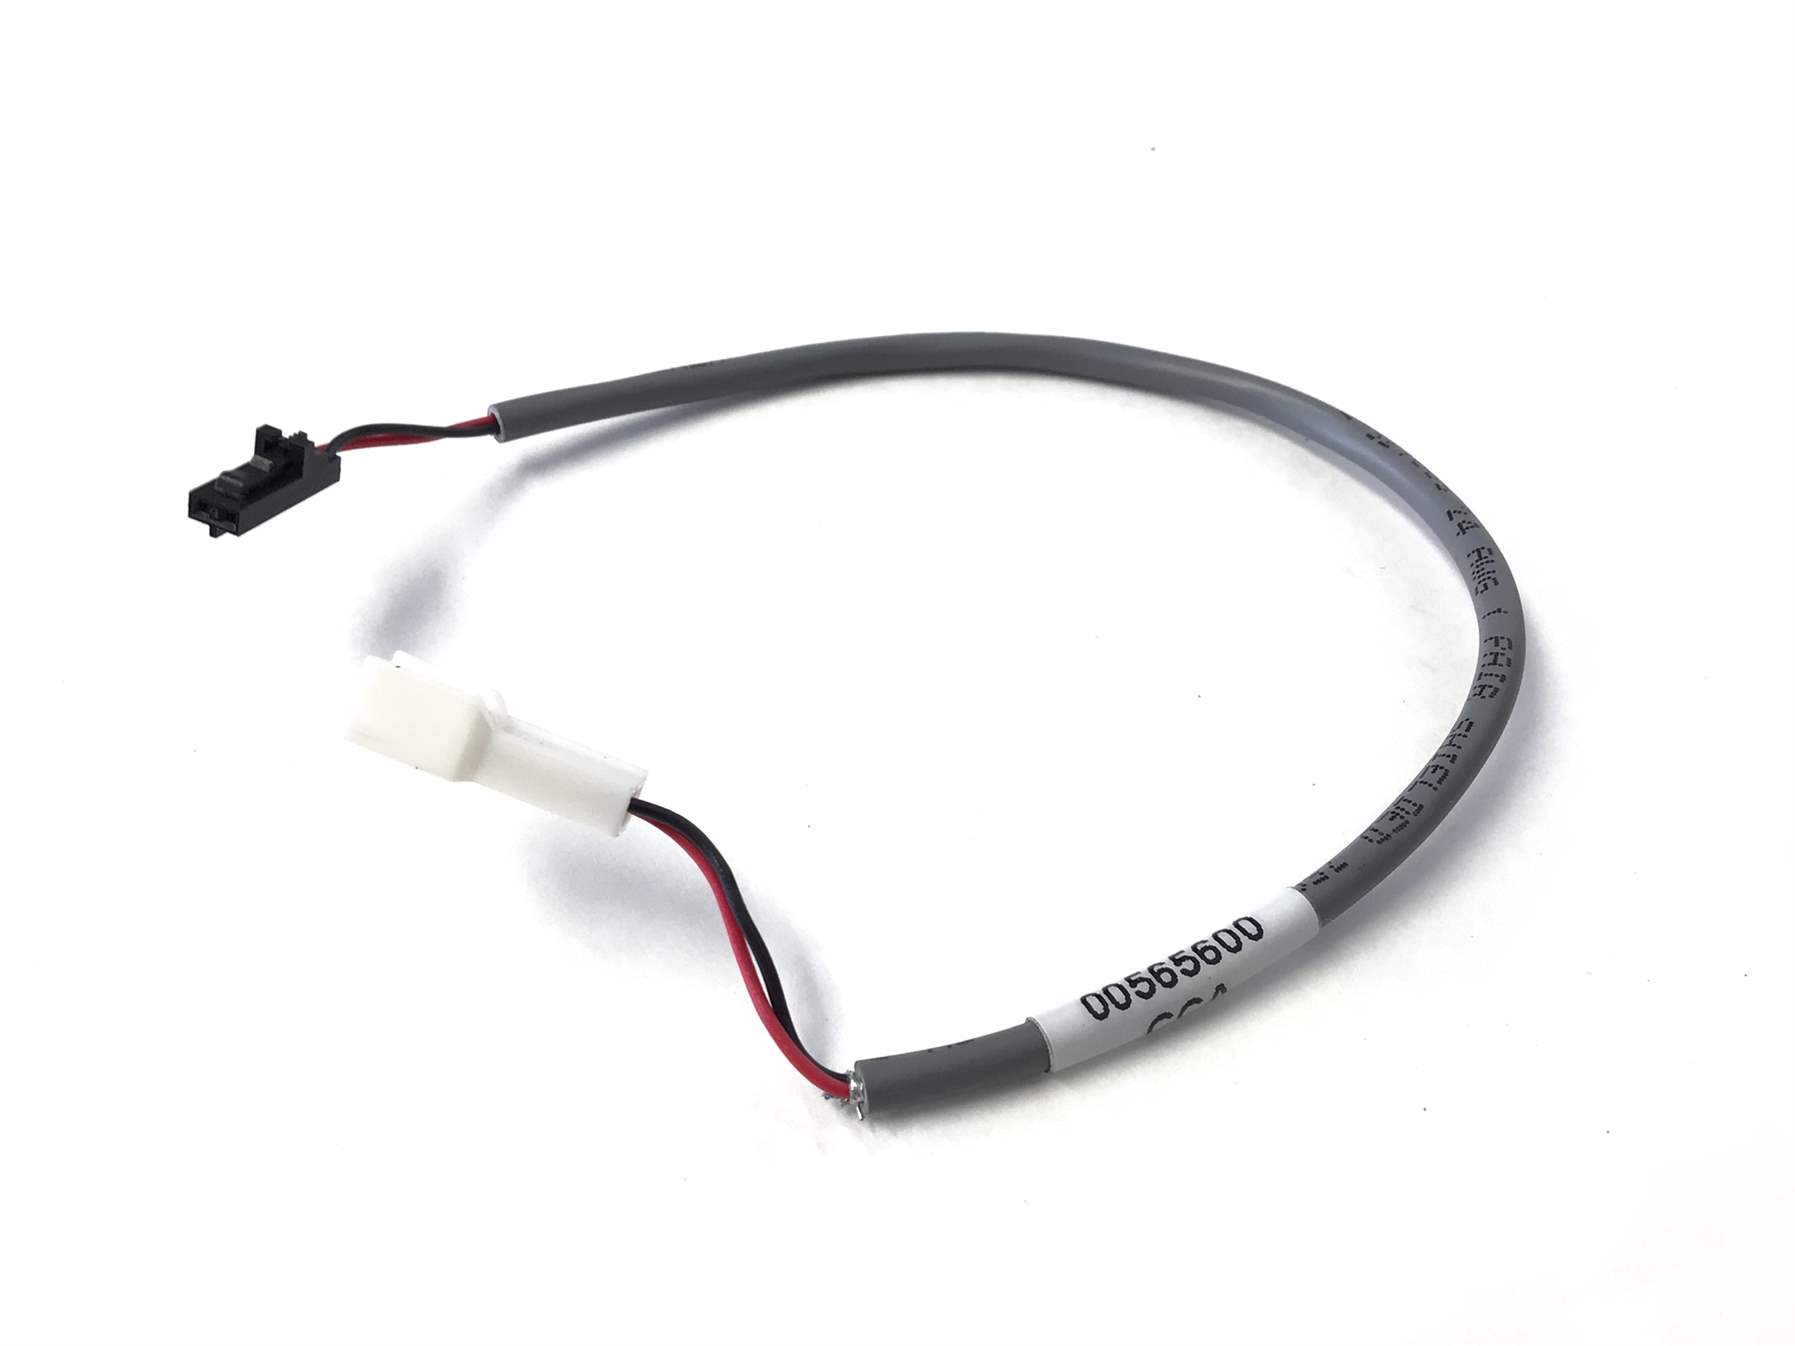 Fan Console Cable Wire Harness (Used)